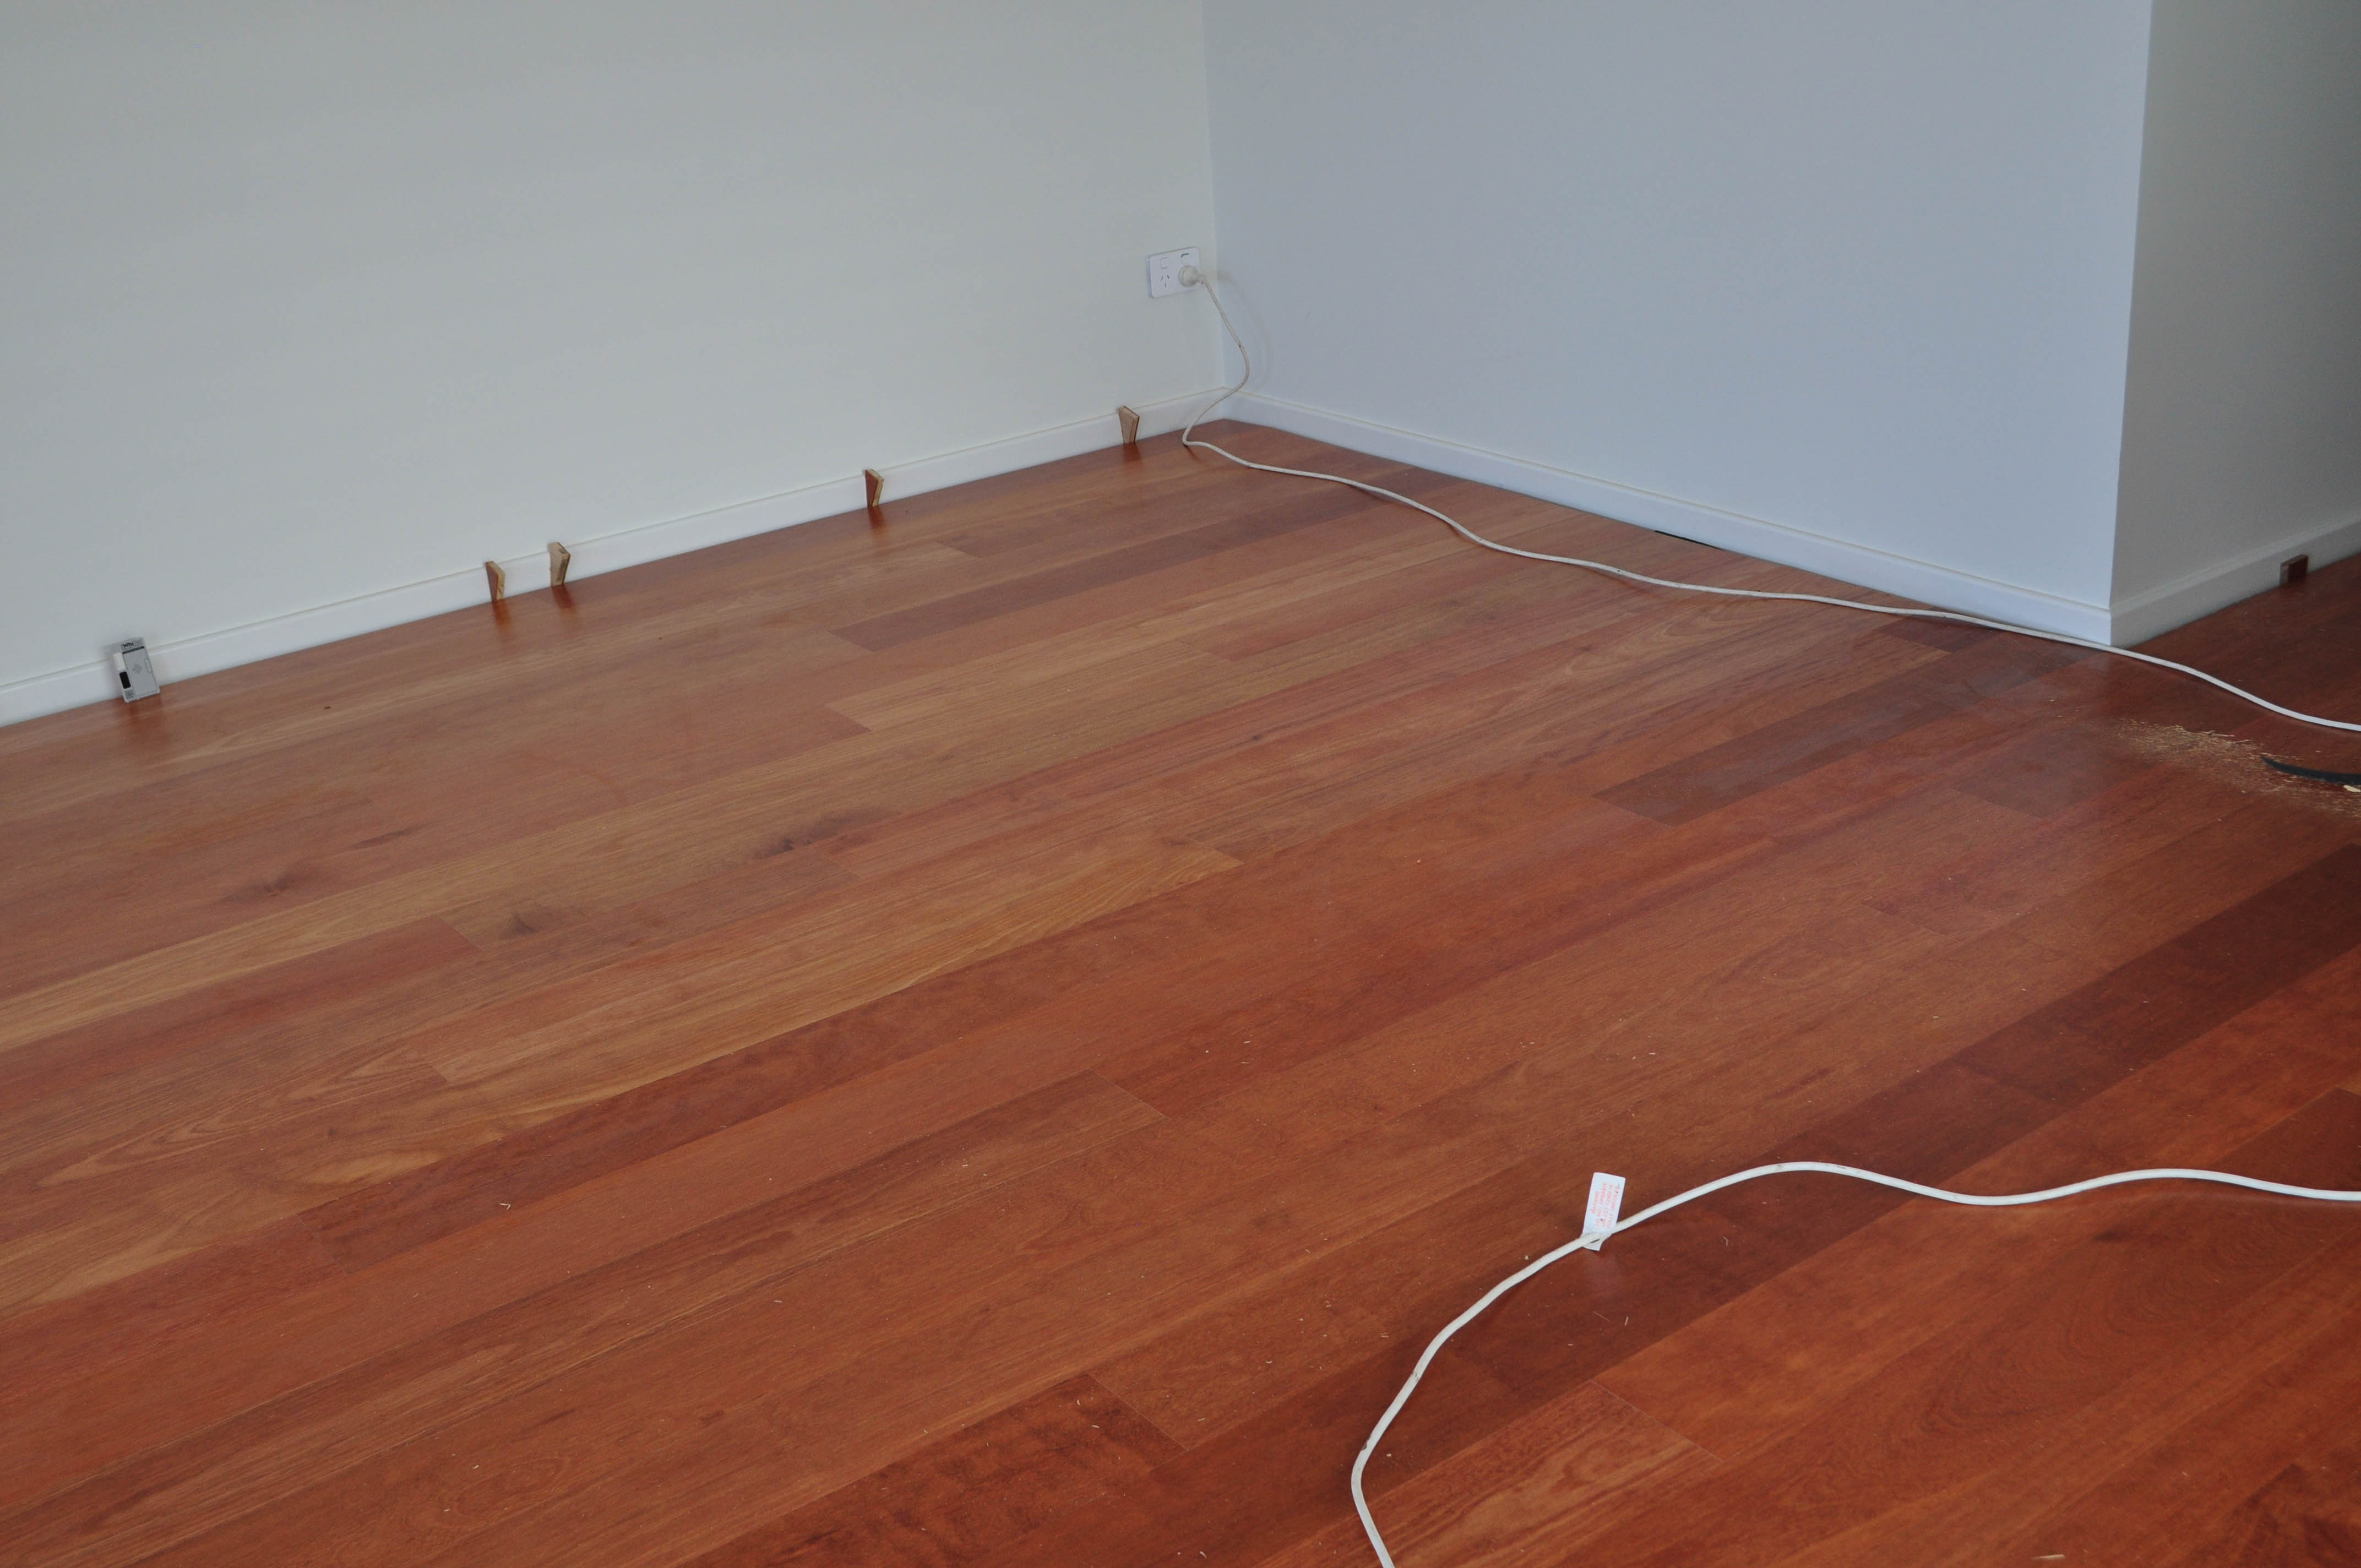 This picture shows 12mm thick, kempes laminate floorboard flooring.